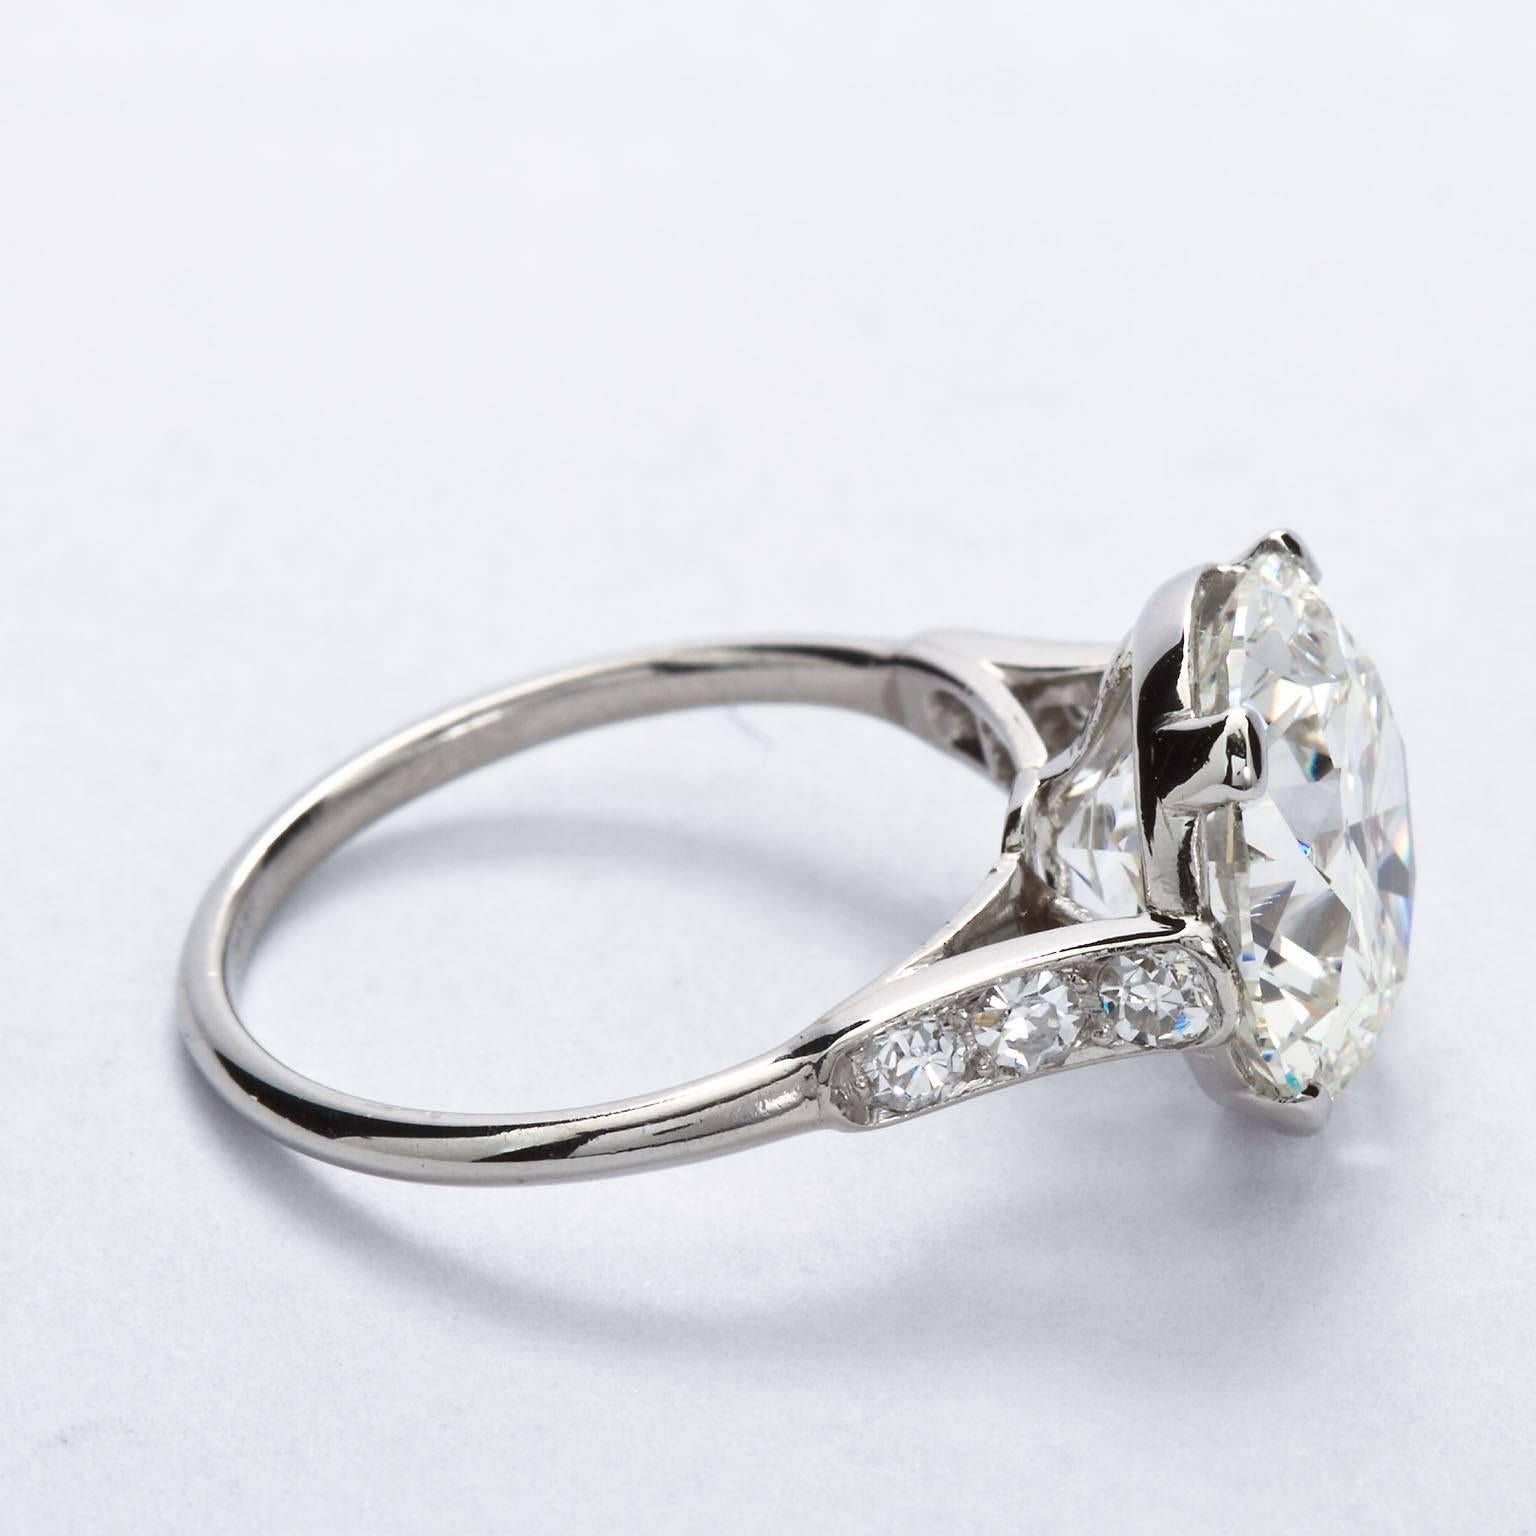 A very fine 4.41 carat round brilliant cut diamond, H color, VS2 clarity with accompanying GIA Report set in a fine white gold and diamond ring stamped with French hallmarks and partially worn 